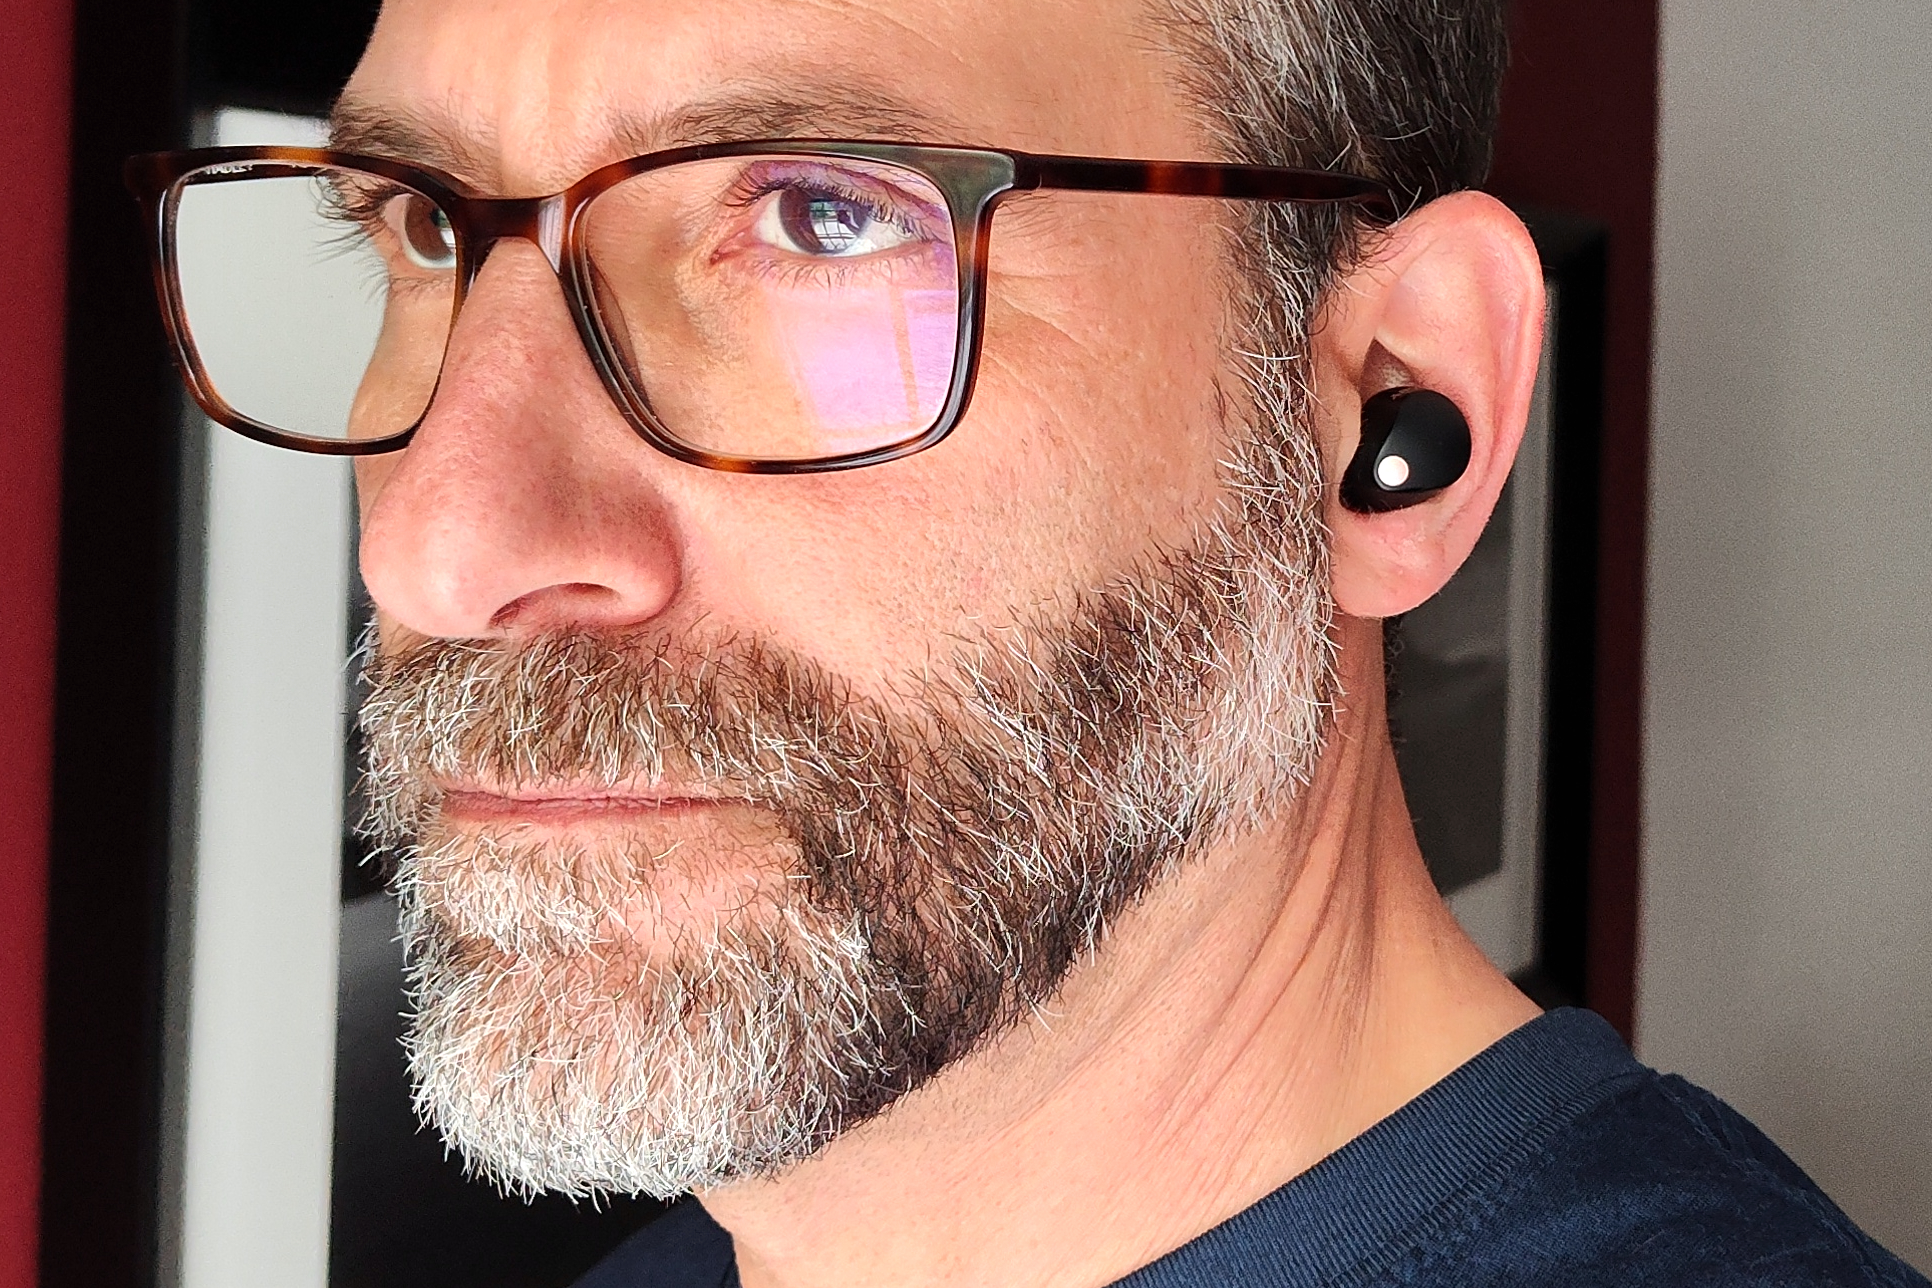 Sony WF-1000XM5 Earbuds Review: They're Smaller and Even Better - CNET